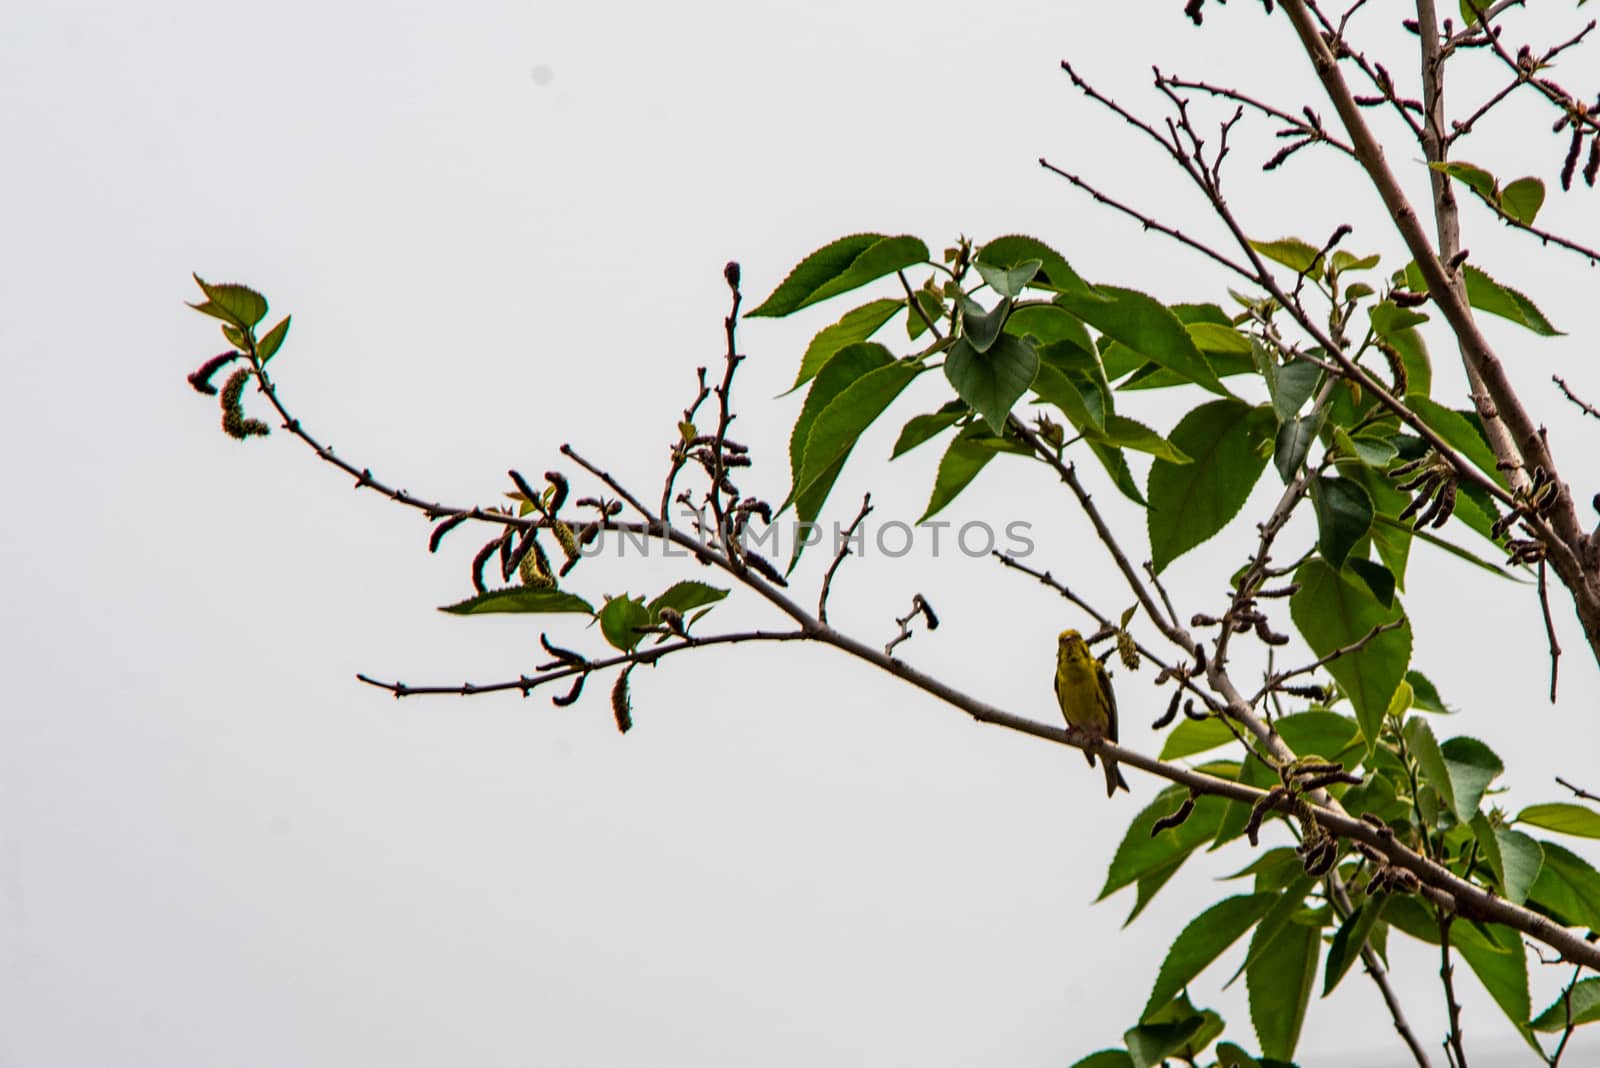 greenfinch bird looking for food by carfedeph